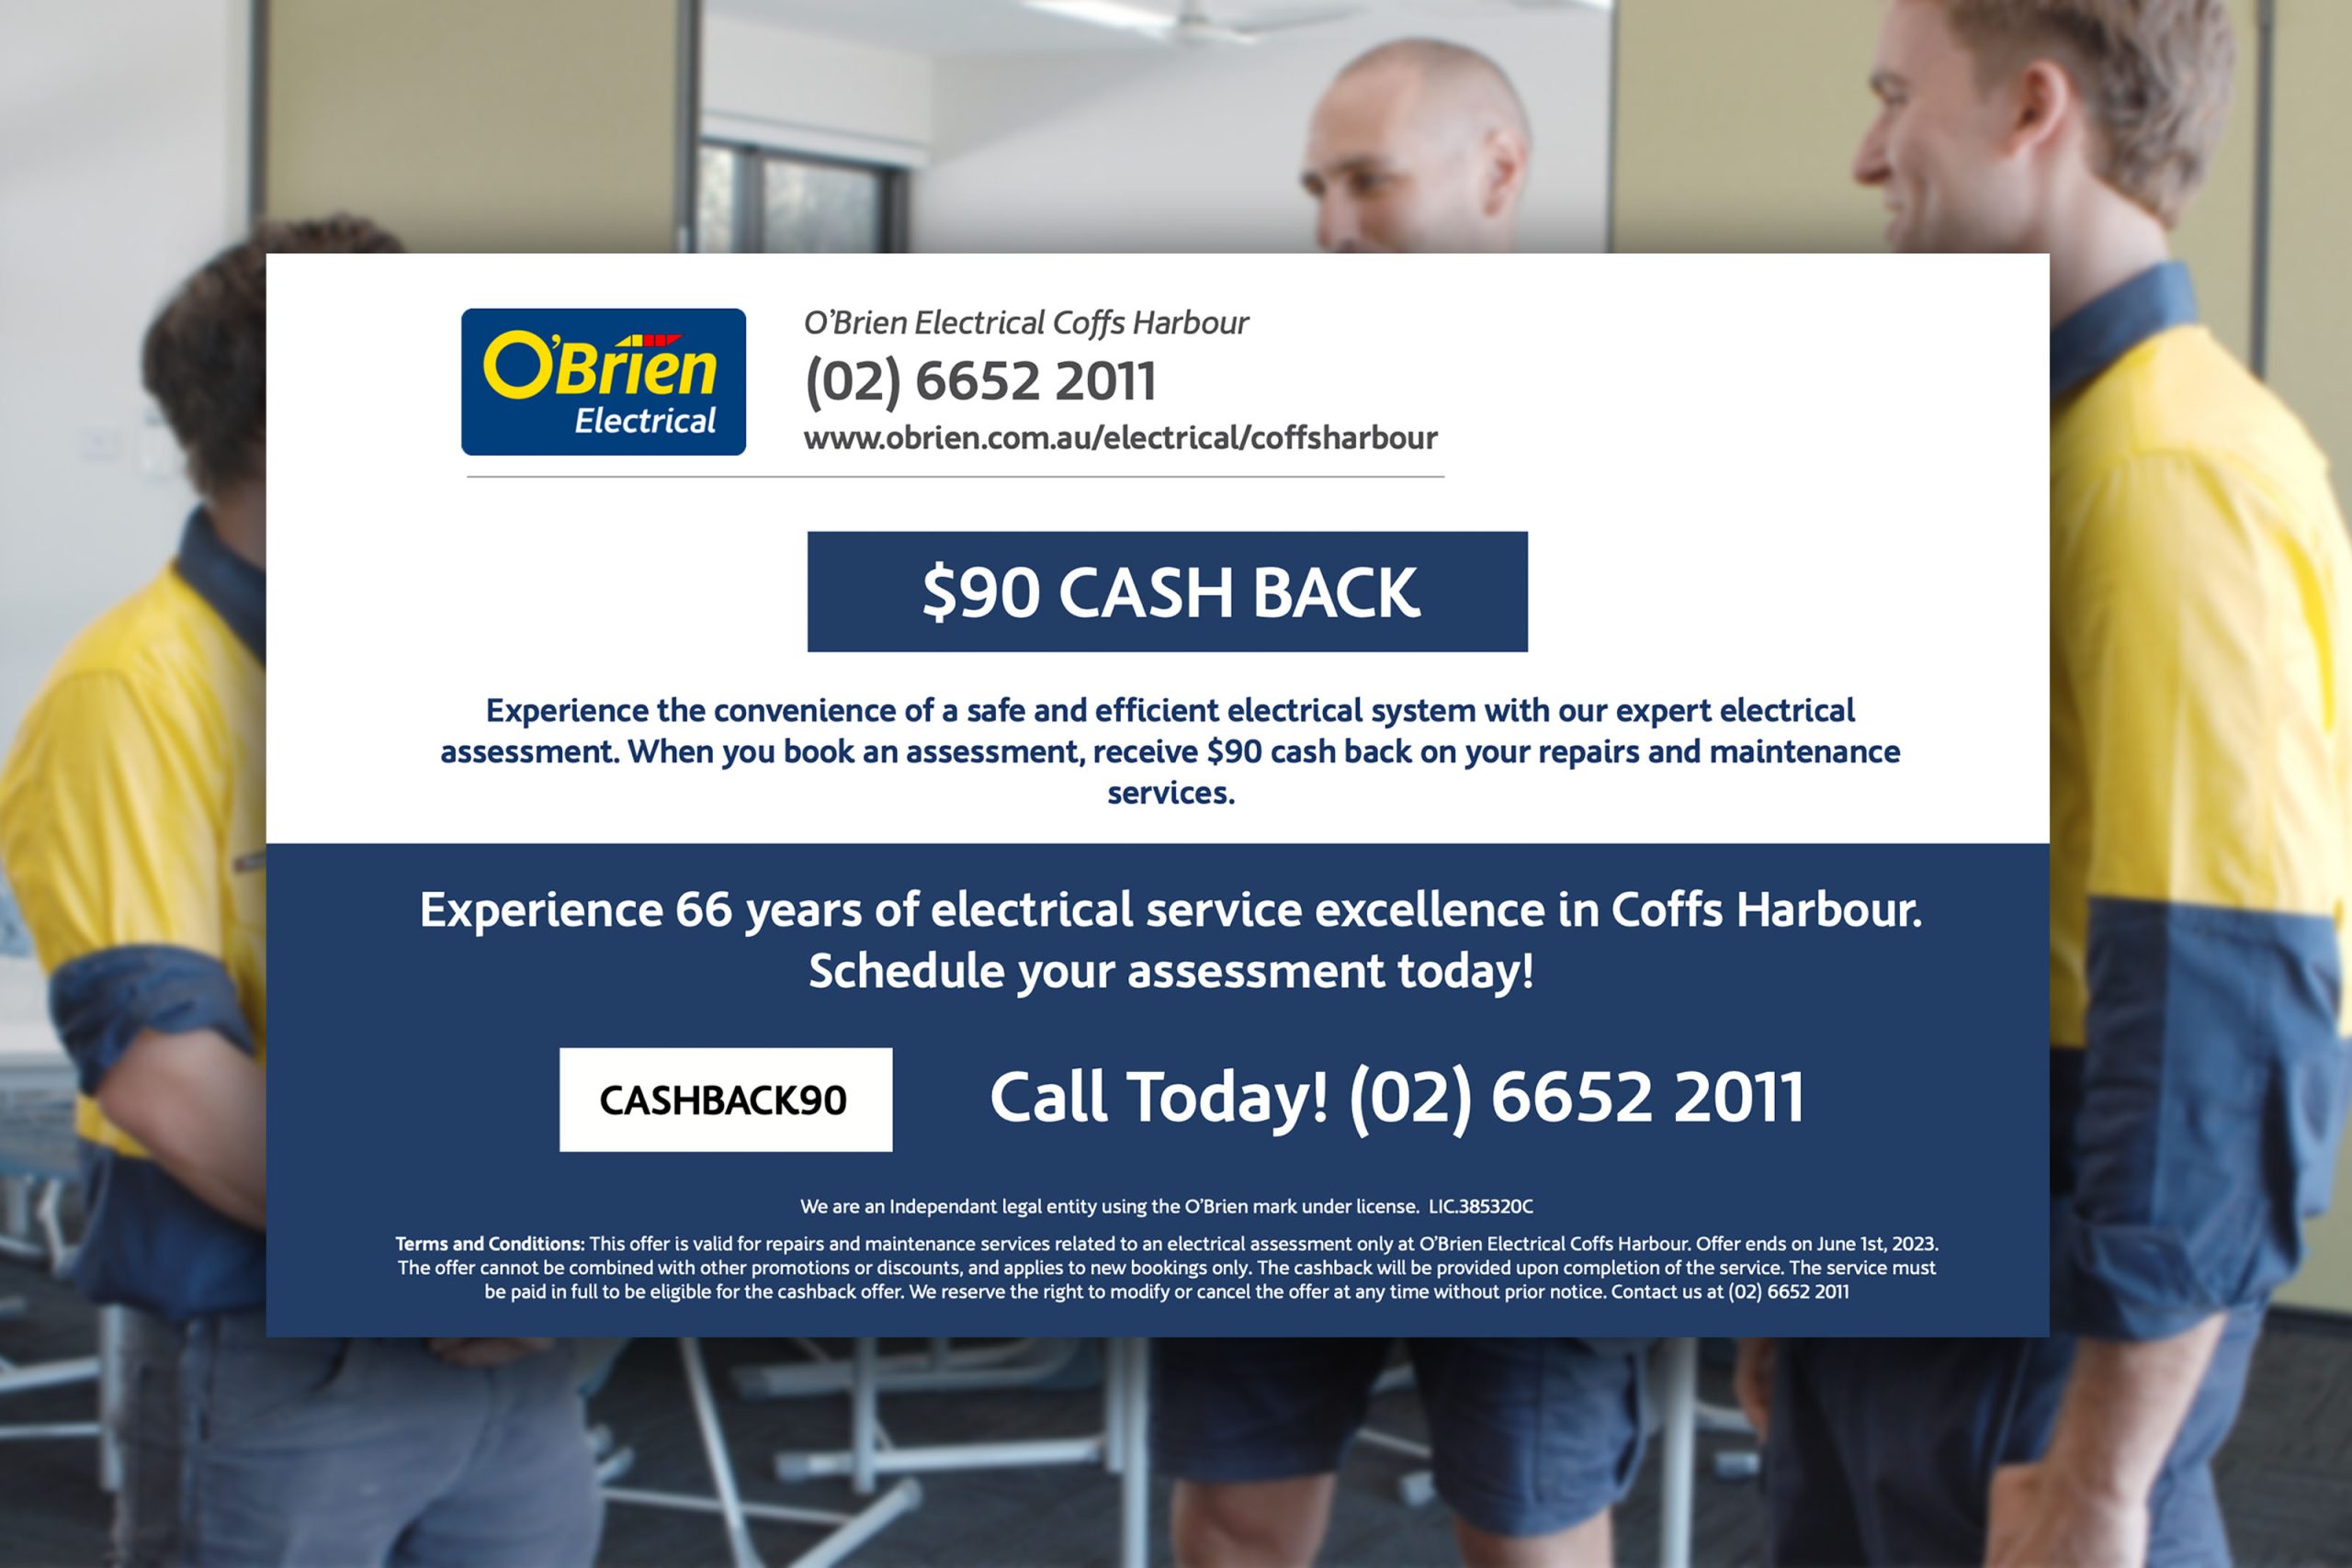 Attention Coffs Harbour! Get your electrical systems assessed with our latest promotion!